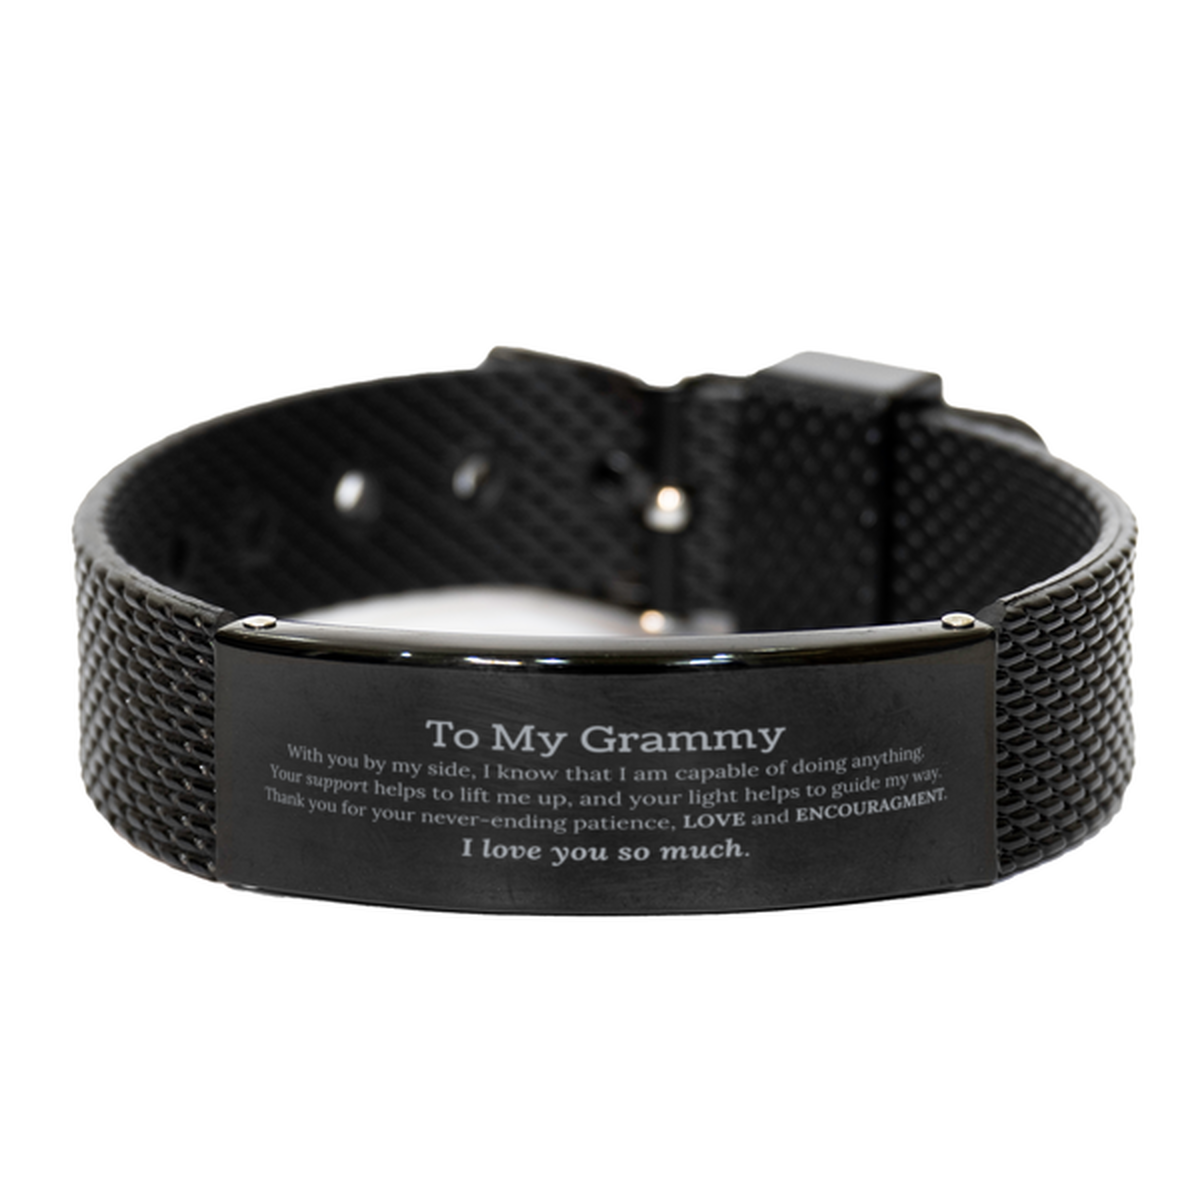 Appreciation Grammy Black Shark Mesh Bracelet Gifts, To My Grammy Birthday Christmas Wedding Keepsake Gifts for Grammy With you by my side, I know that I am capable of doing anything. I love you so much